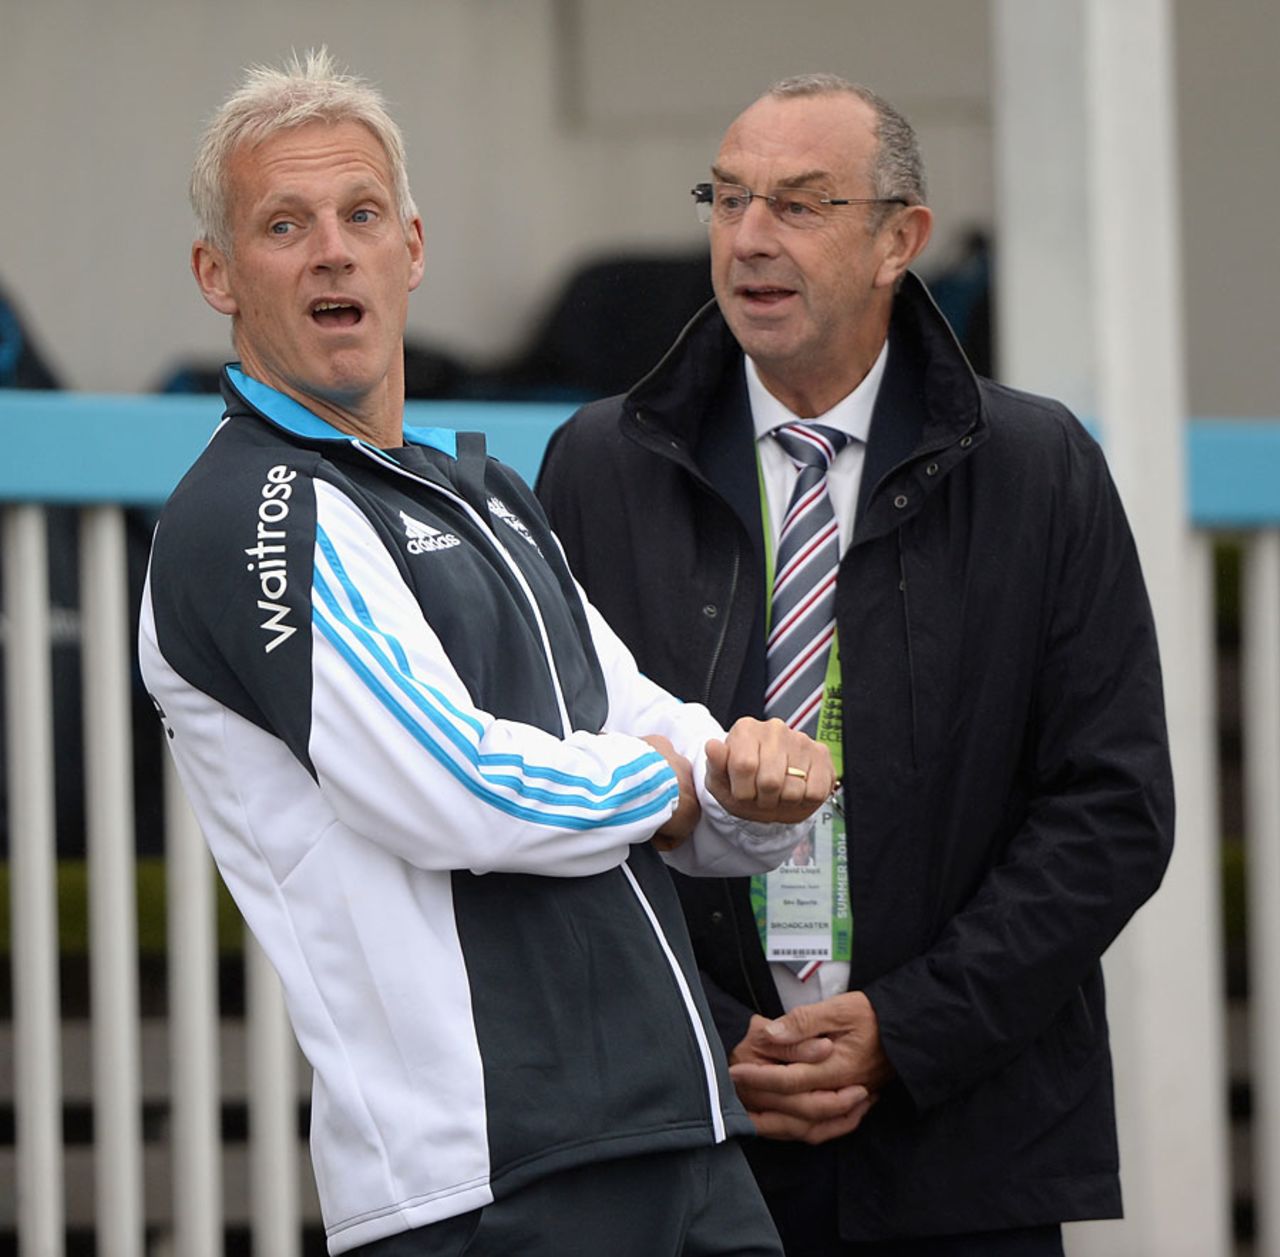 What did Bumble say? David Lloyd chats with Peter Moores, Scotland v England, only ODI, Aberdeen, May 9, 2014